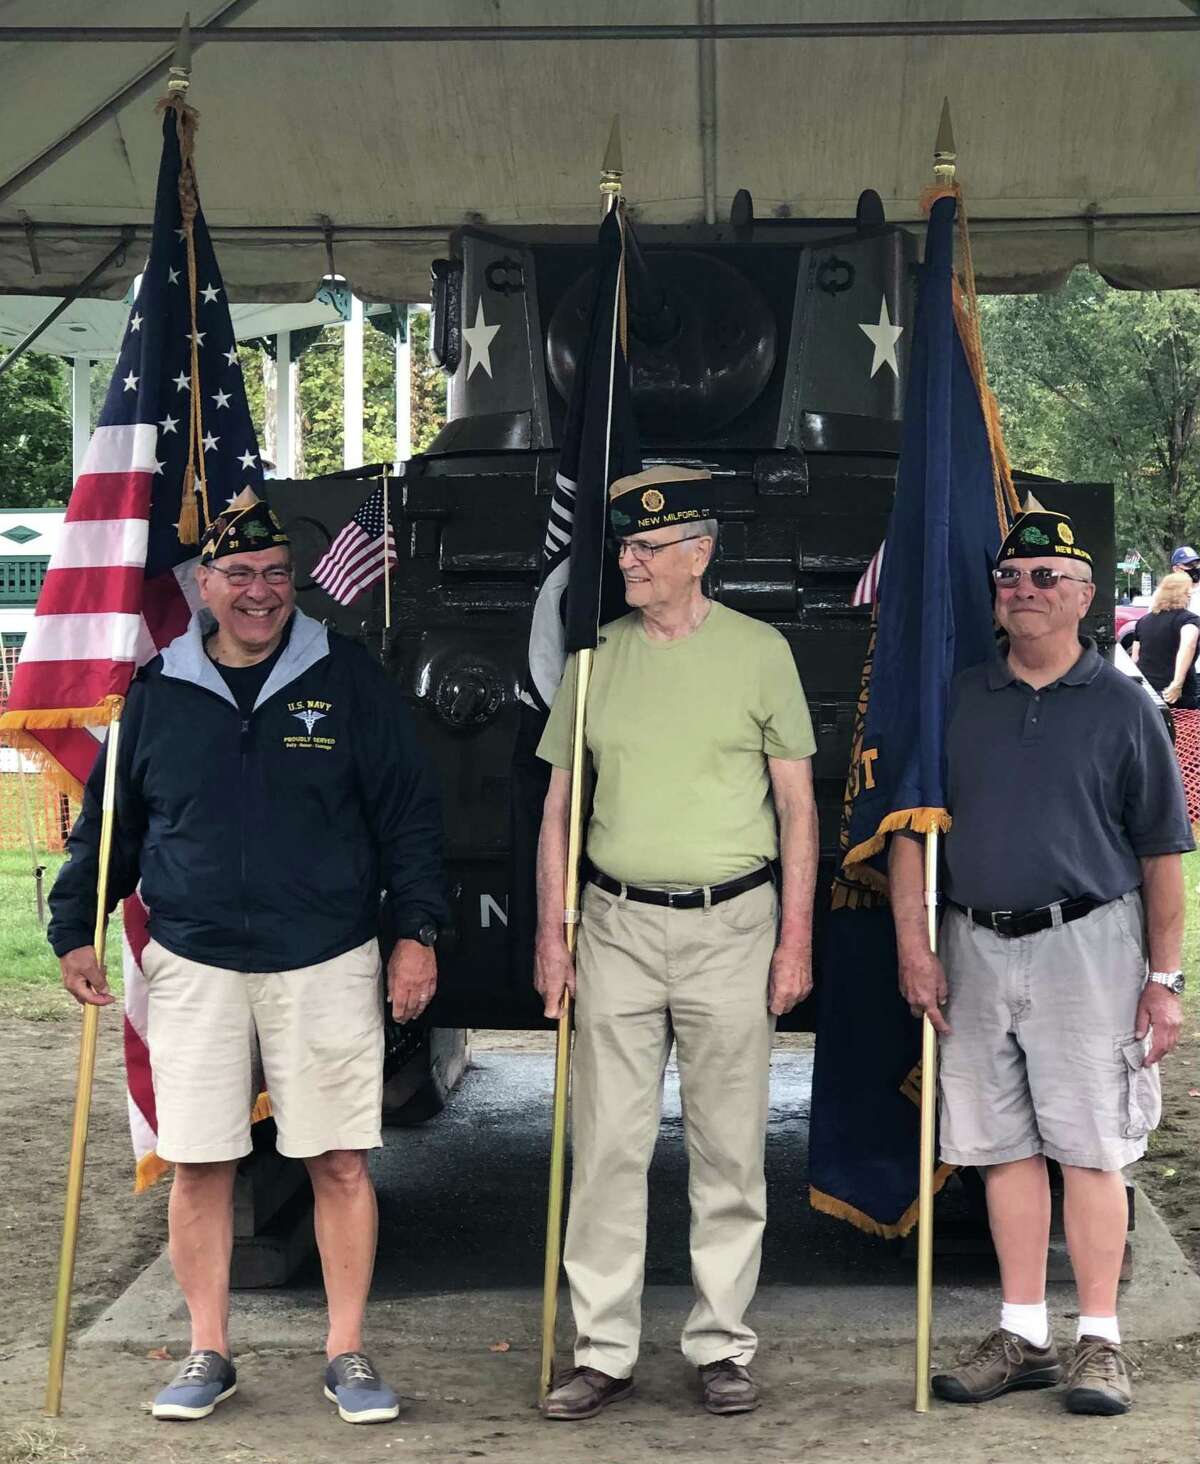 American Legion Post 31 Honor Guard members, from left to right, Bob Greco, Dan Sullivan and Rocco Barberio, stand proud and pleased as they wait for the start of Saturday’s rededication ceremony of the restored tank.